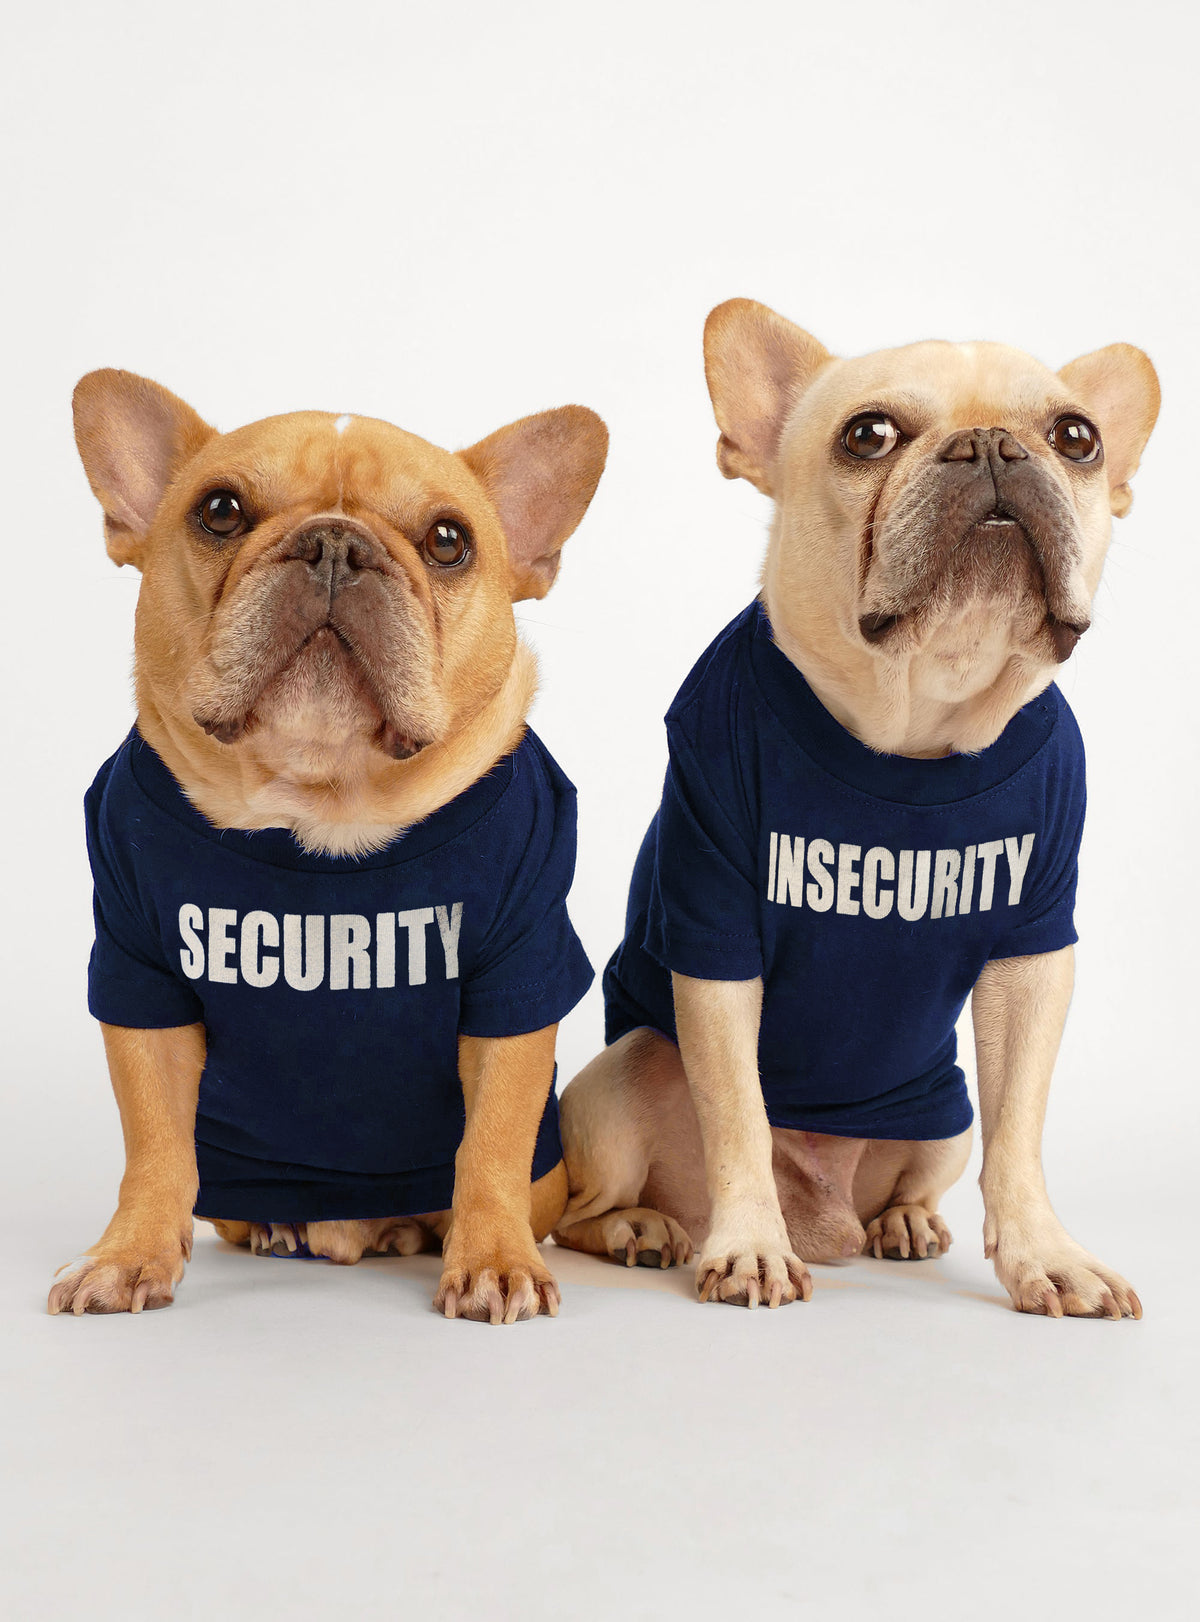 Security + Insecurity (2-Pack) Dog Tee